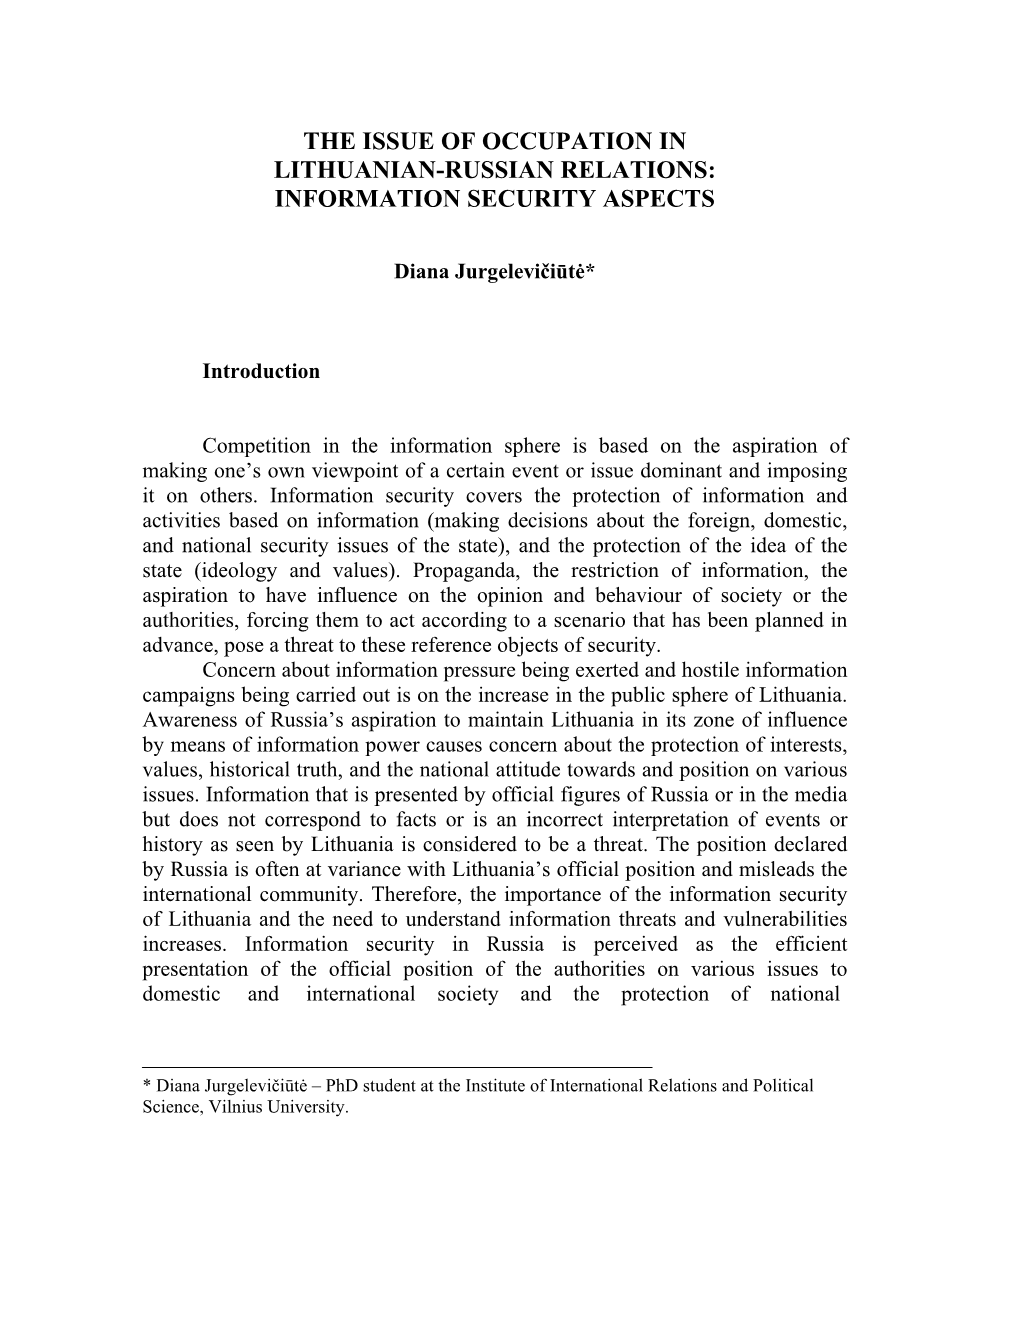 The Issue of Occupation in Lithuanian-Russian Relations: Information Security Aspects